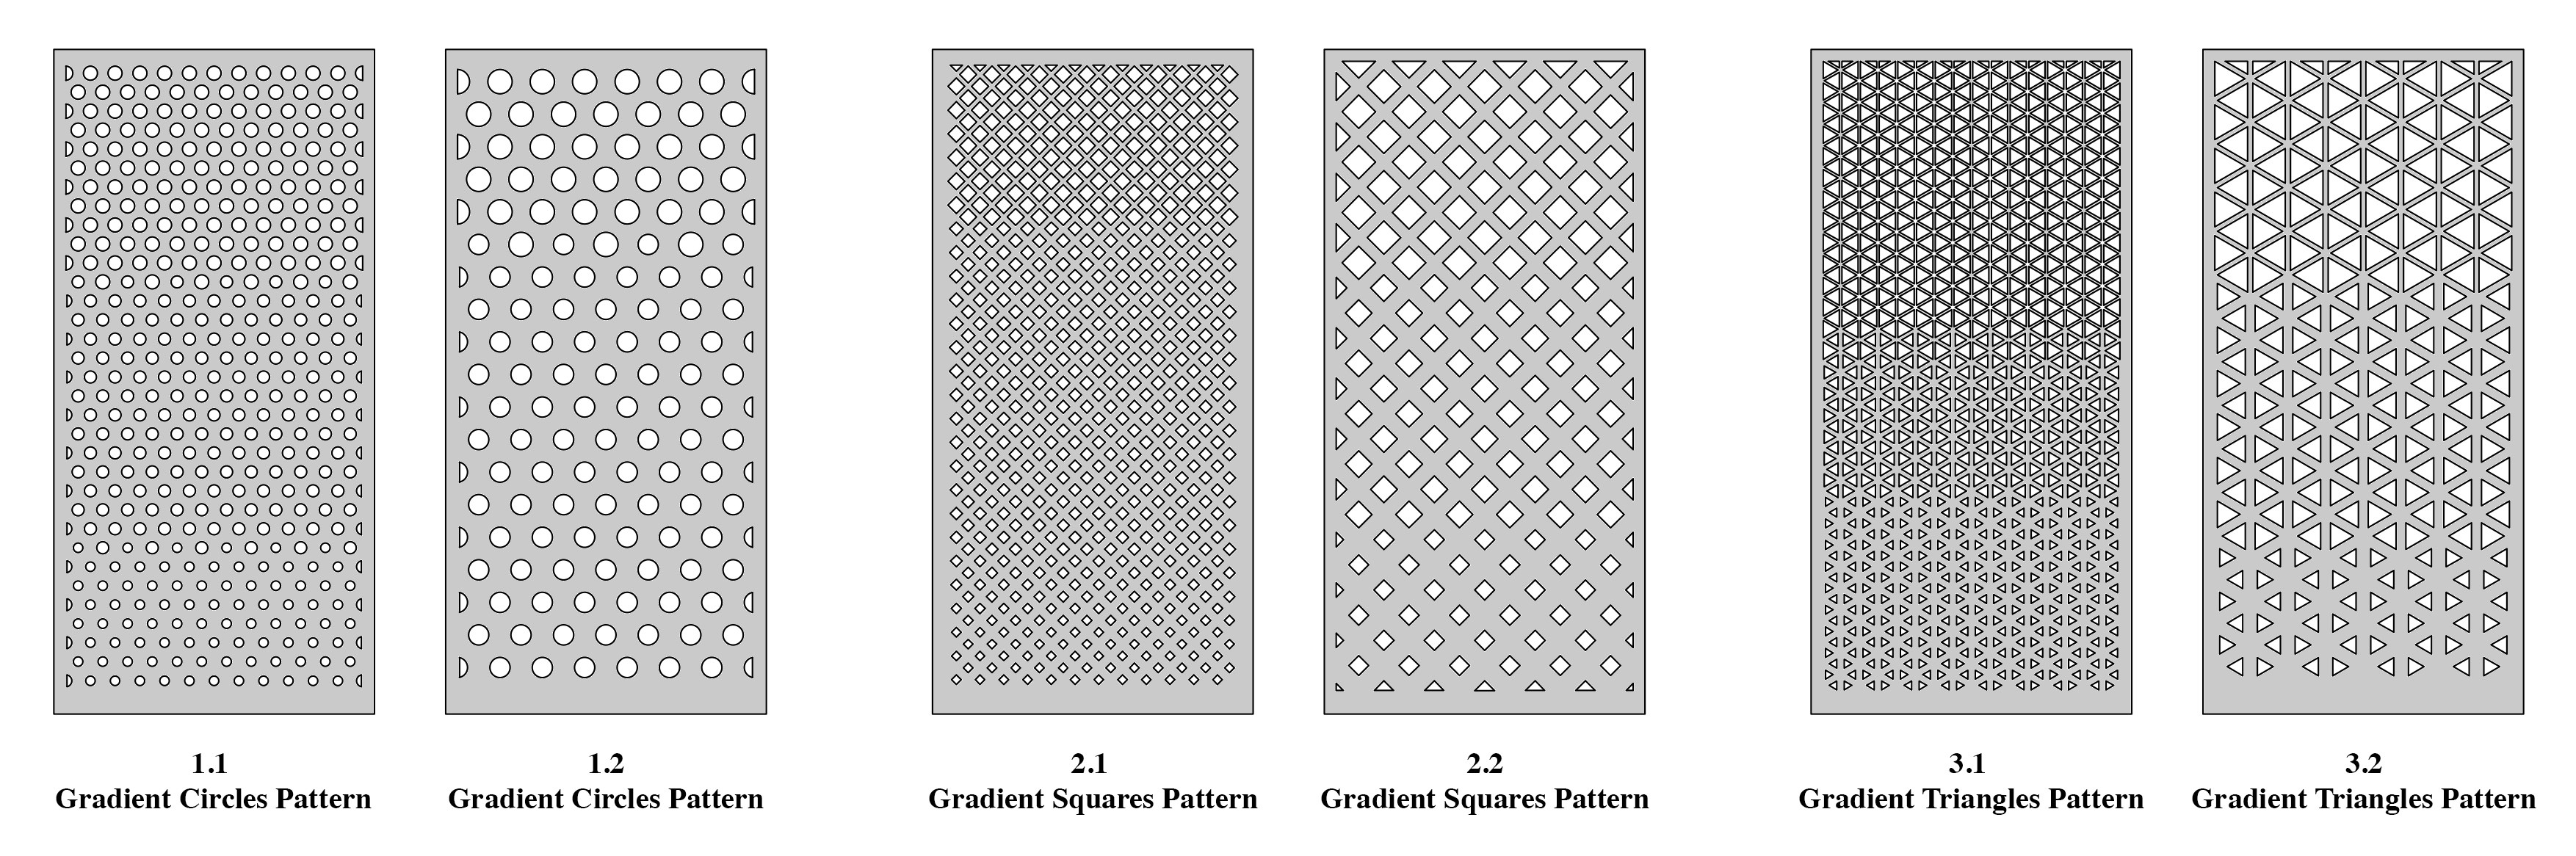 Parametric patterned facades.